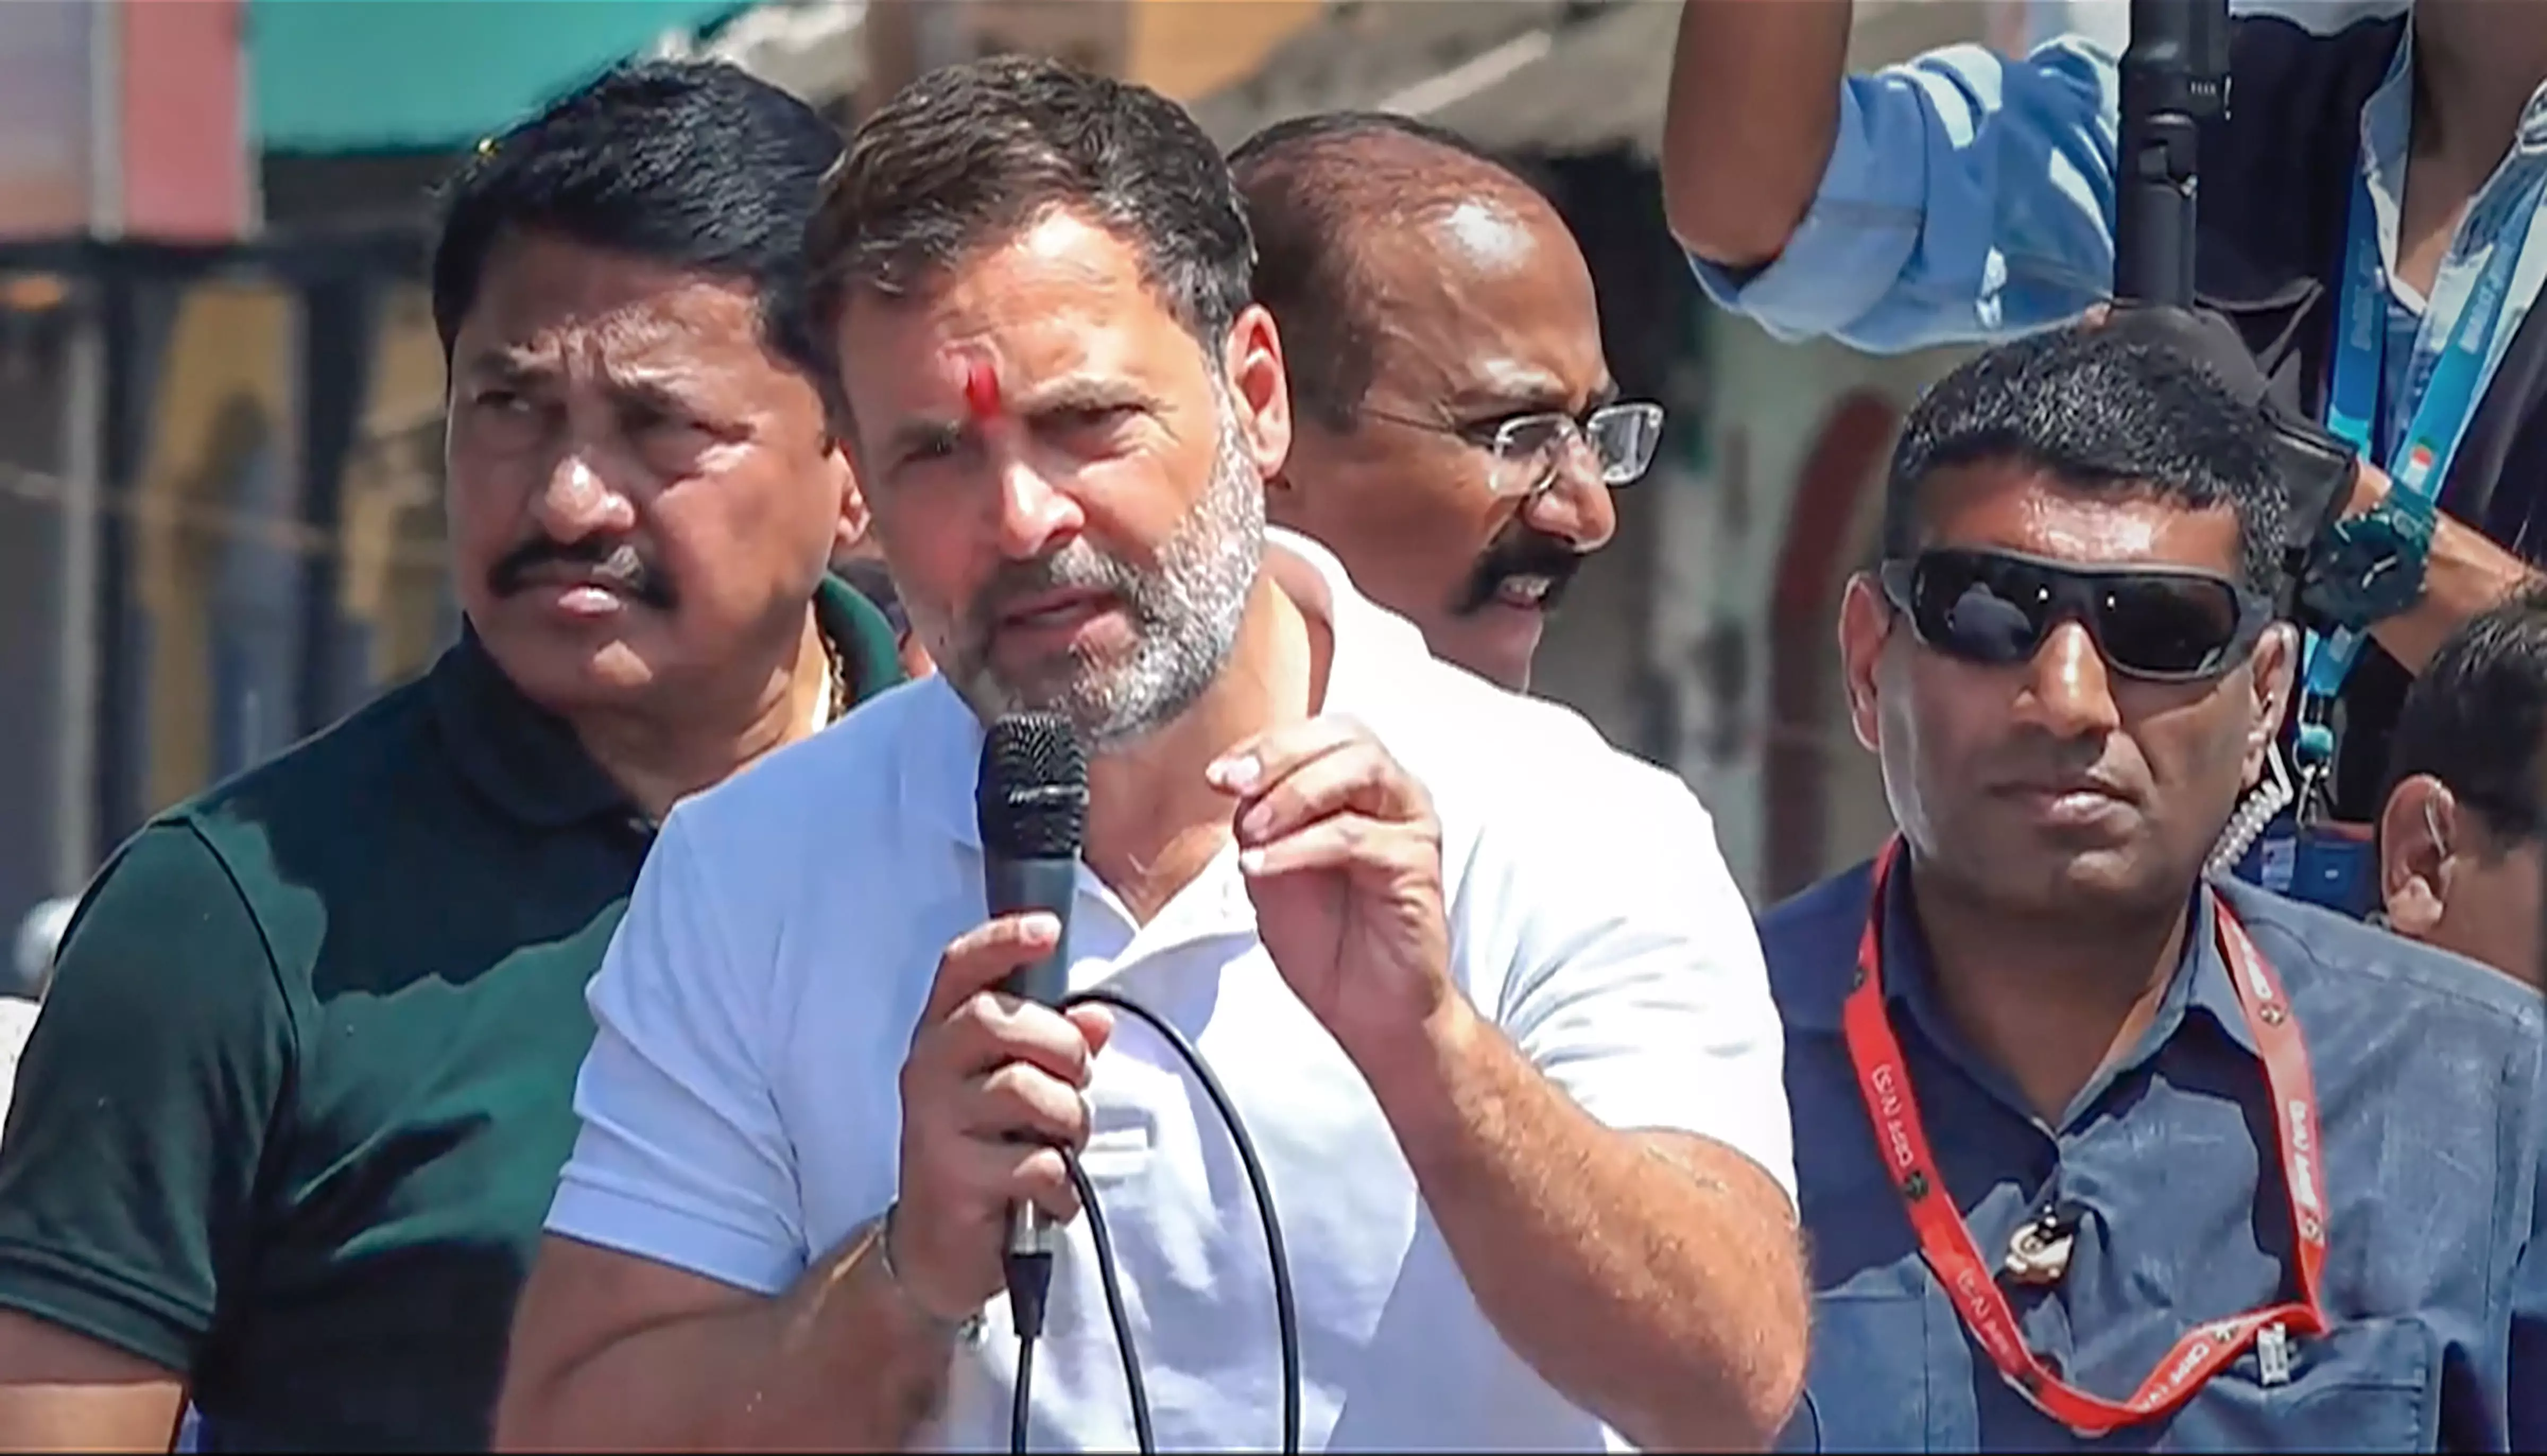 Unemployment, inflation and bhagidari are crucial issues country is facing: Rahul